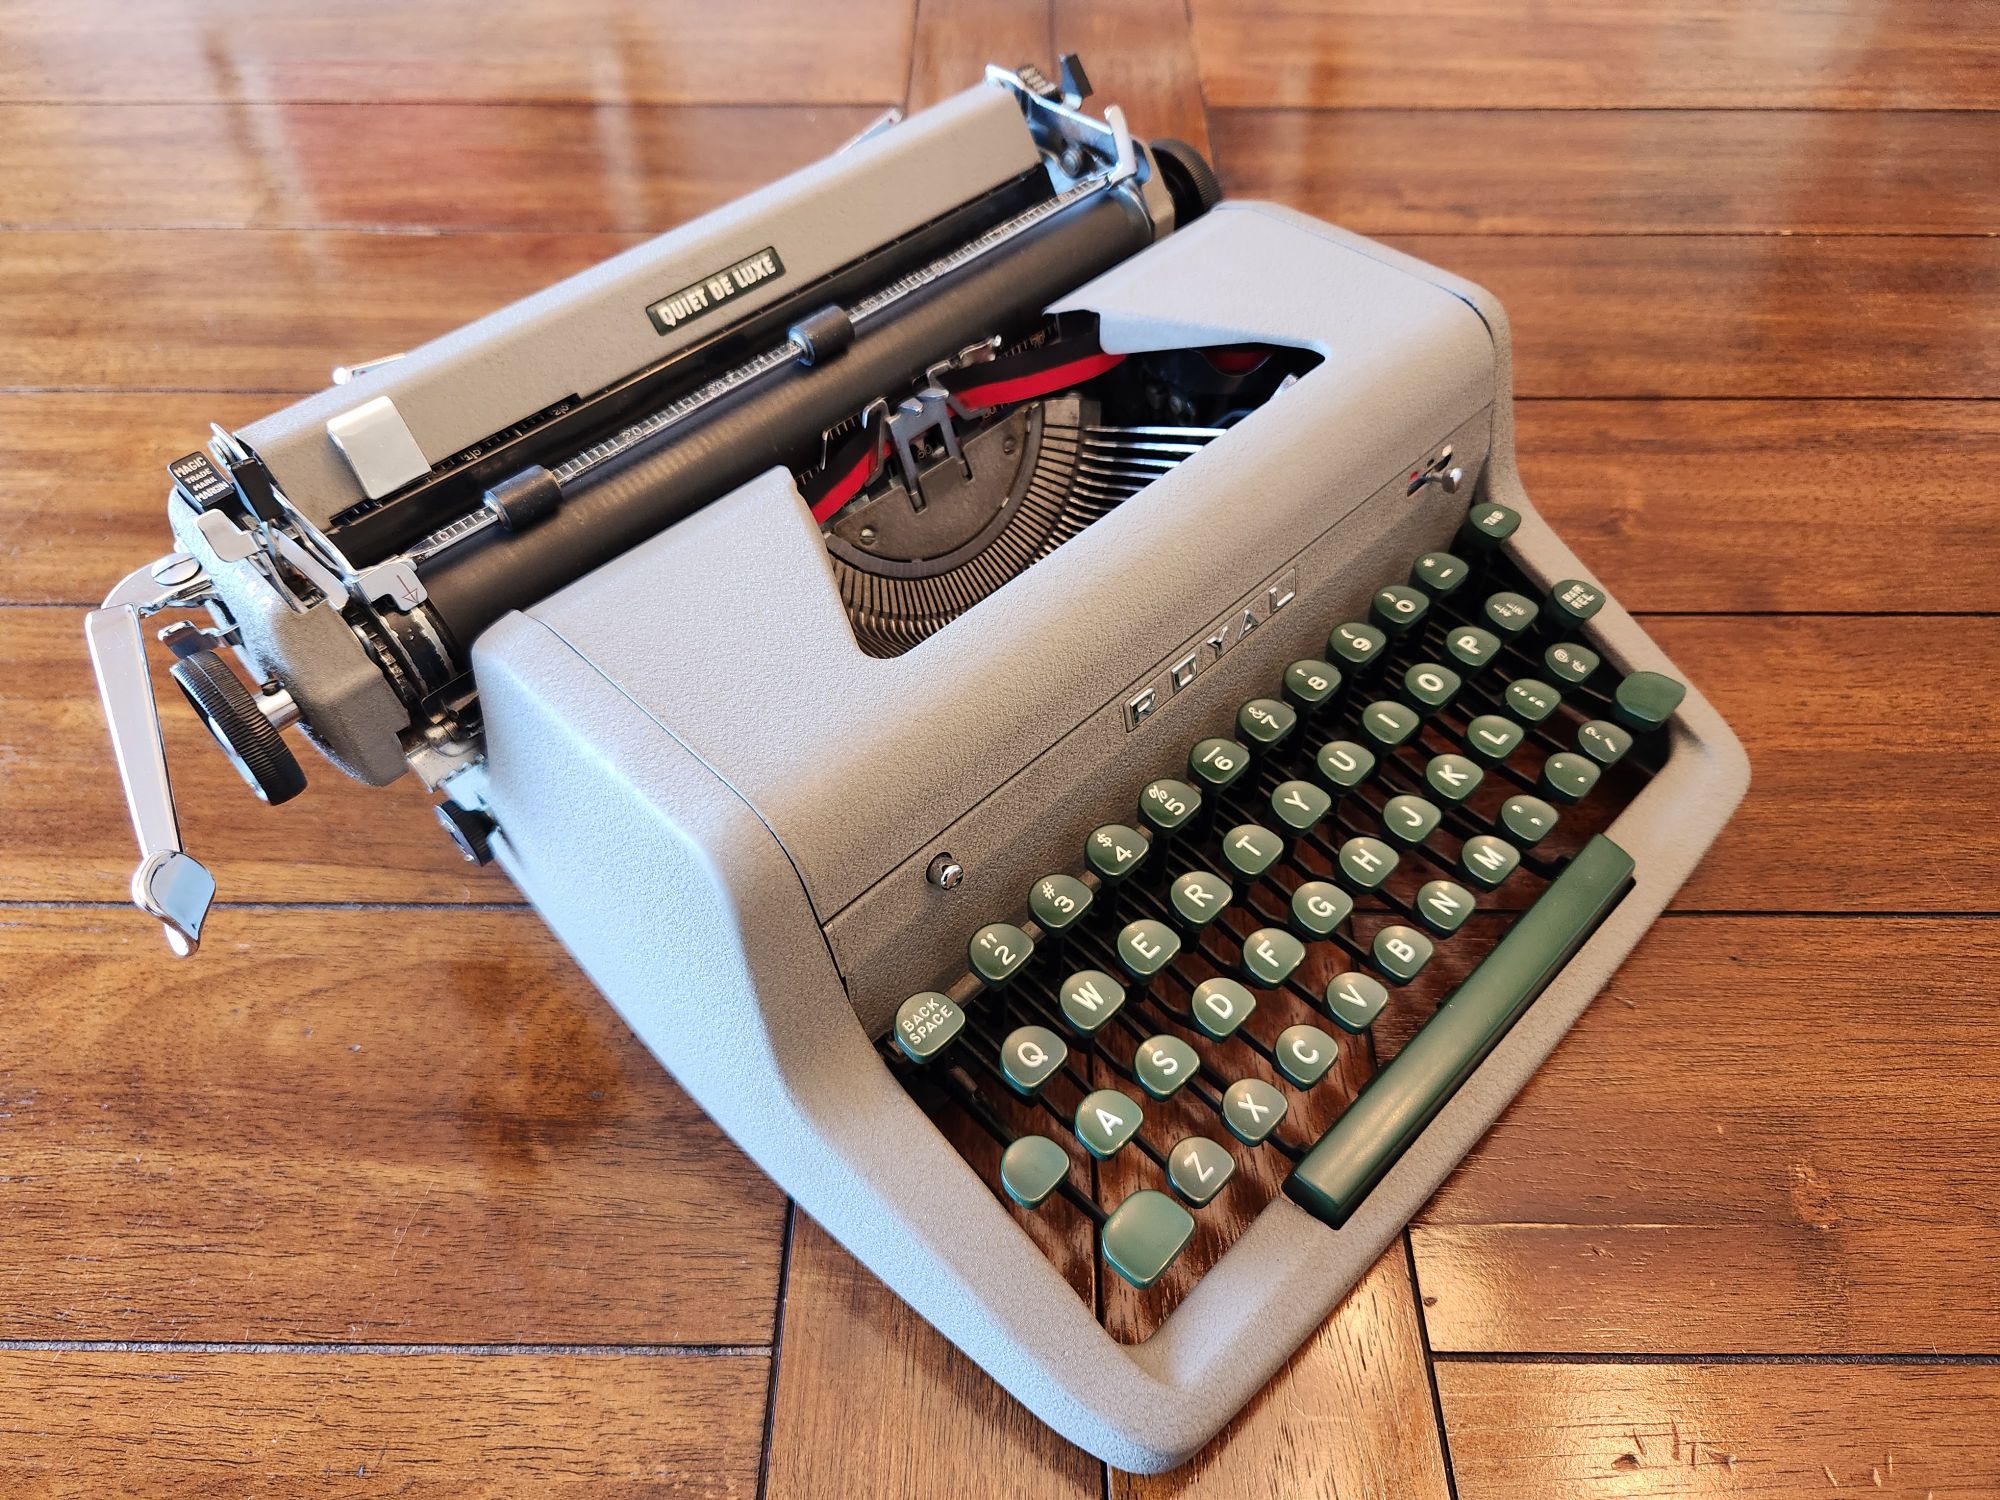 View down onto a 1955 Royal Quiet De Luxe Portable Typewriter with a gray body and green keys sitting on a polished wooden table.